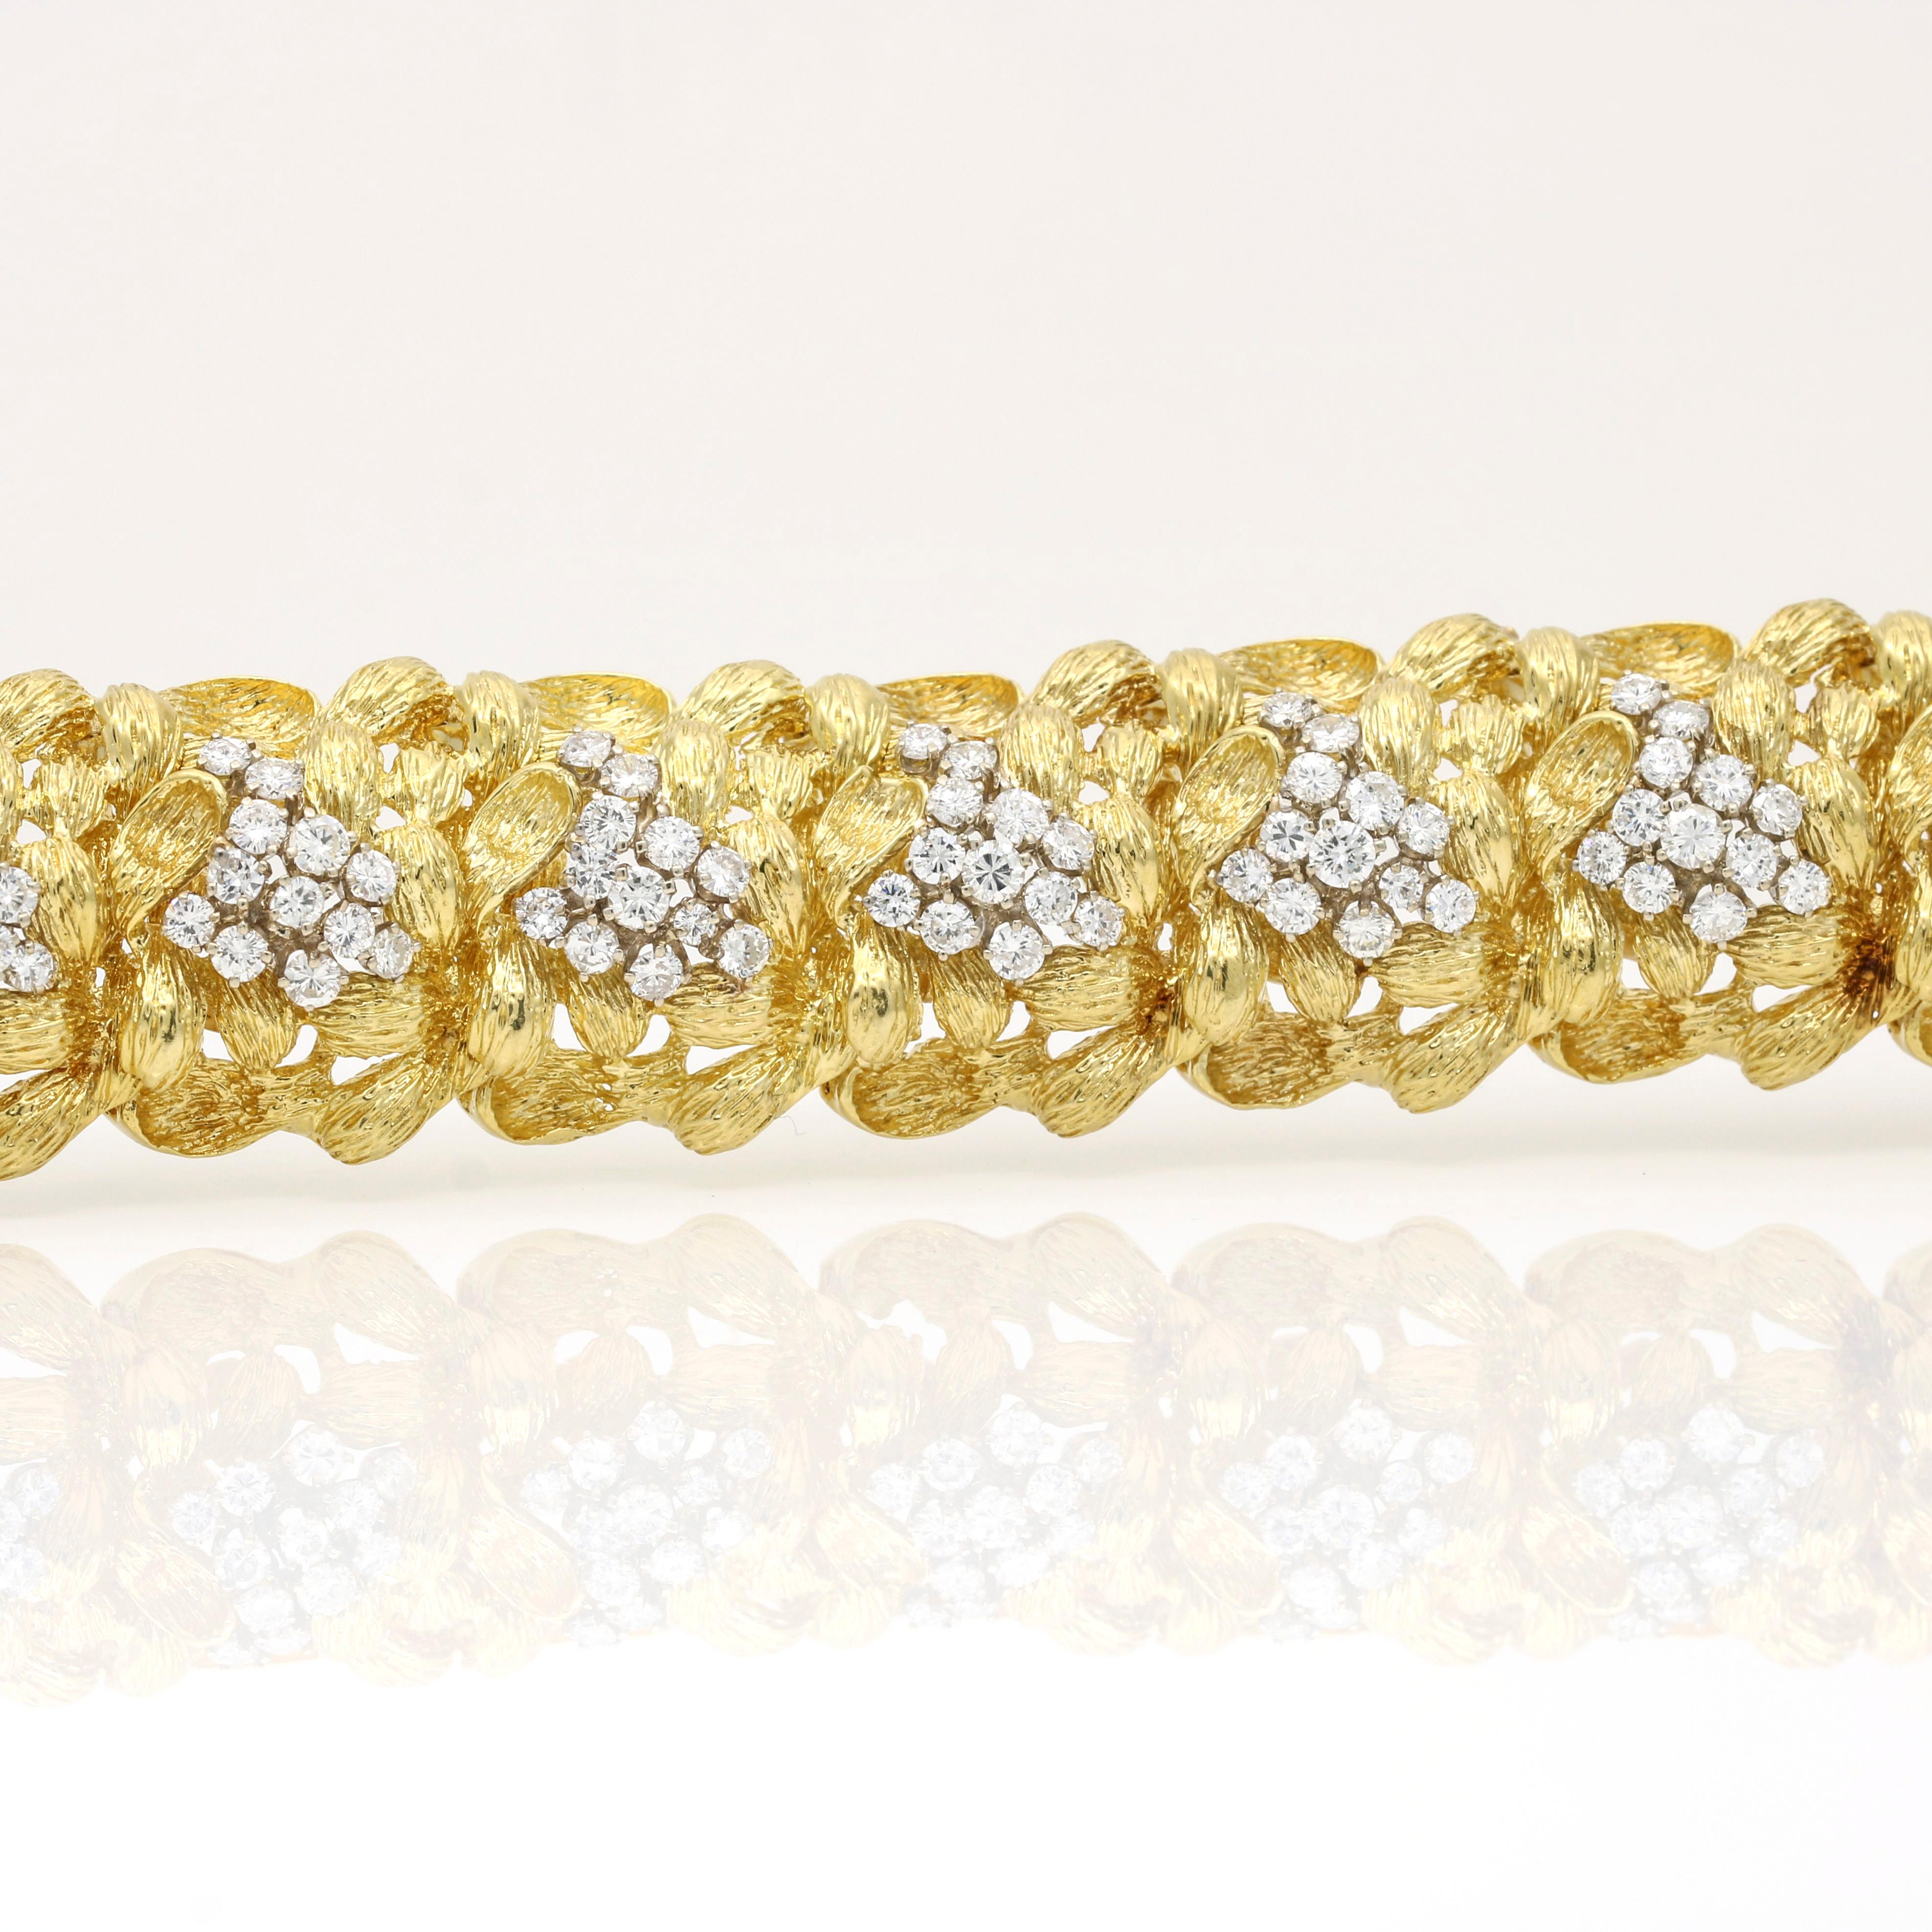 Women's statement link bracelet made of 18K yellow gold from the mid-century era. It has a gold weight of 75.60 grams and features significant, bold links with textured gold resembling leaves. The bracelet is encrusted with dazzling round-cut